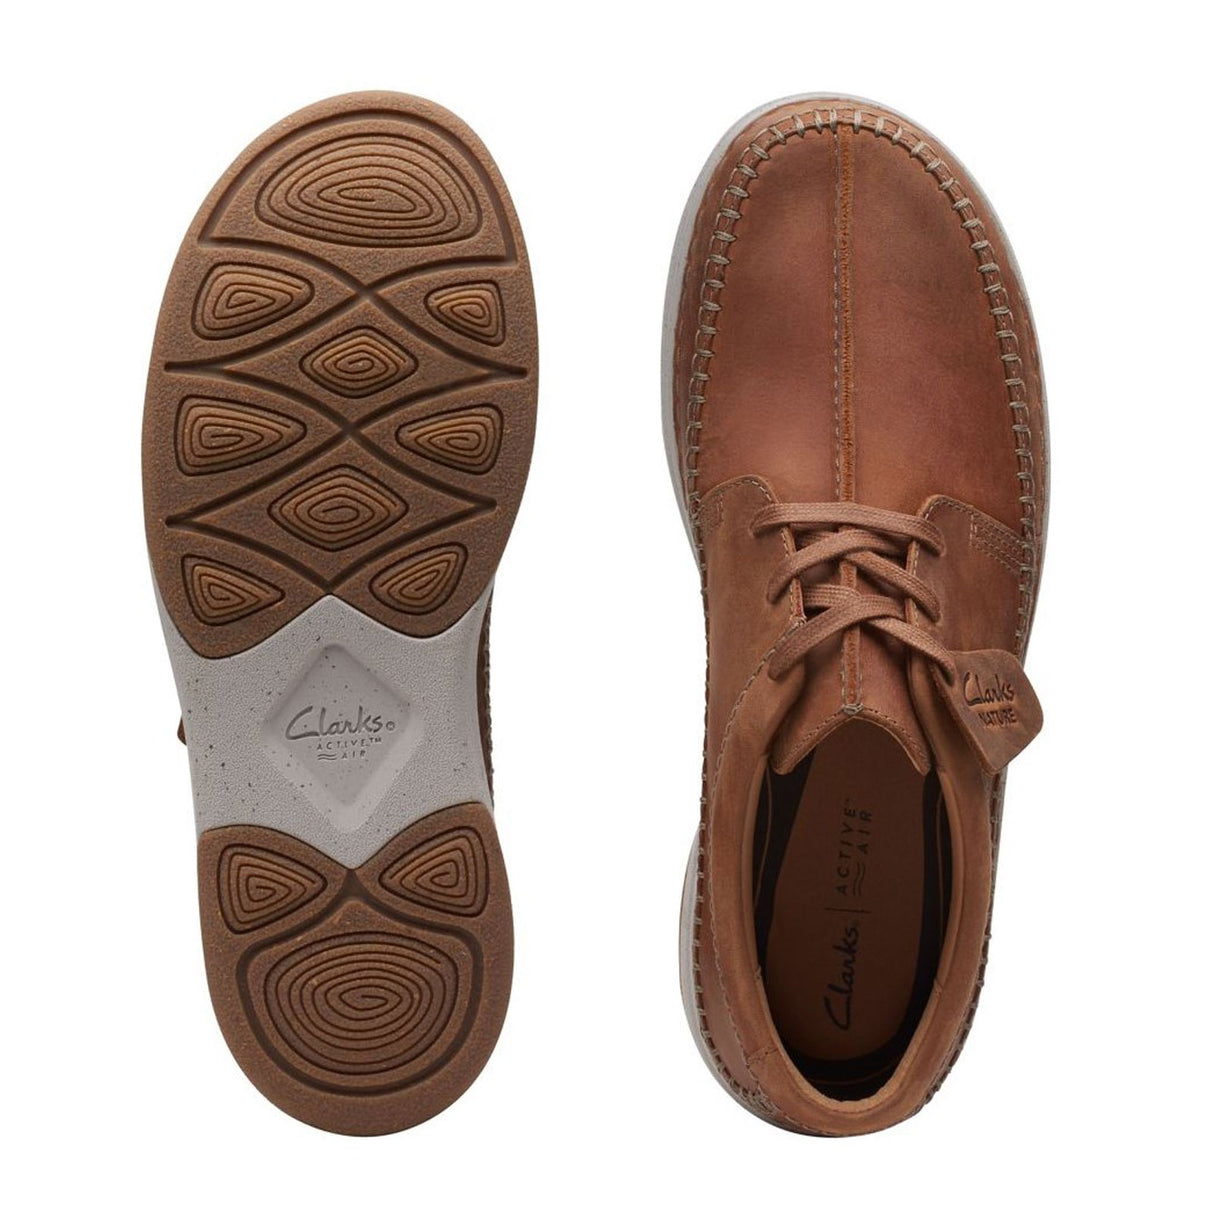 Clarks Nature 5 Tie Lace-up Shoe (Men) - Beeswax Leather Dress-Casual - Lace Ups - The Heel Shoe Fitters